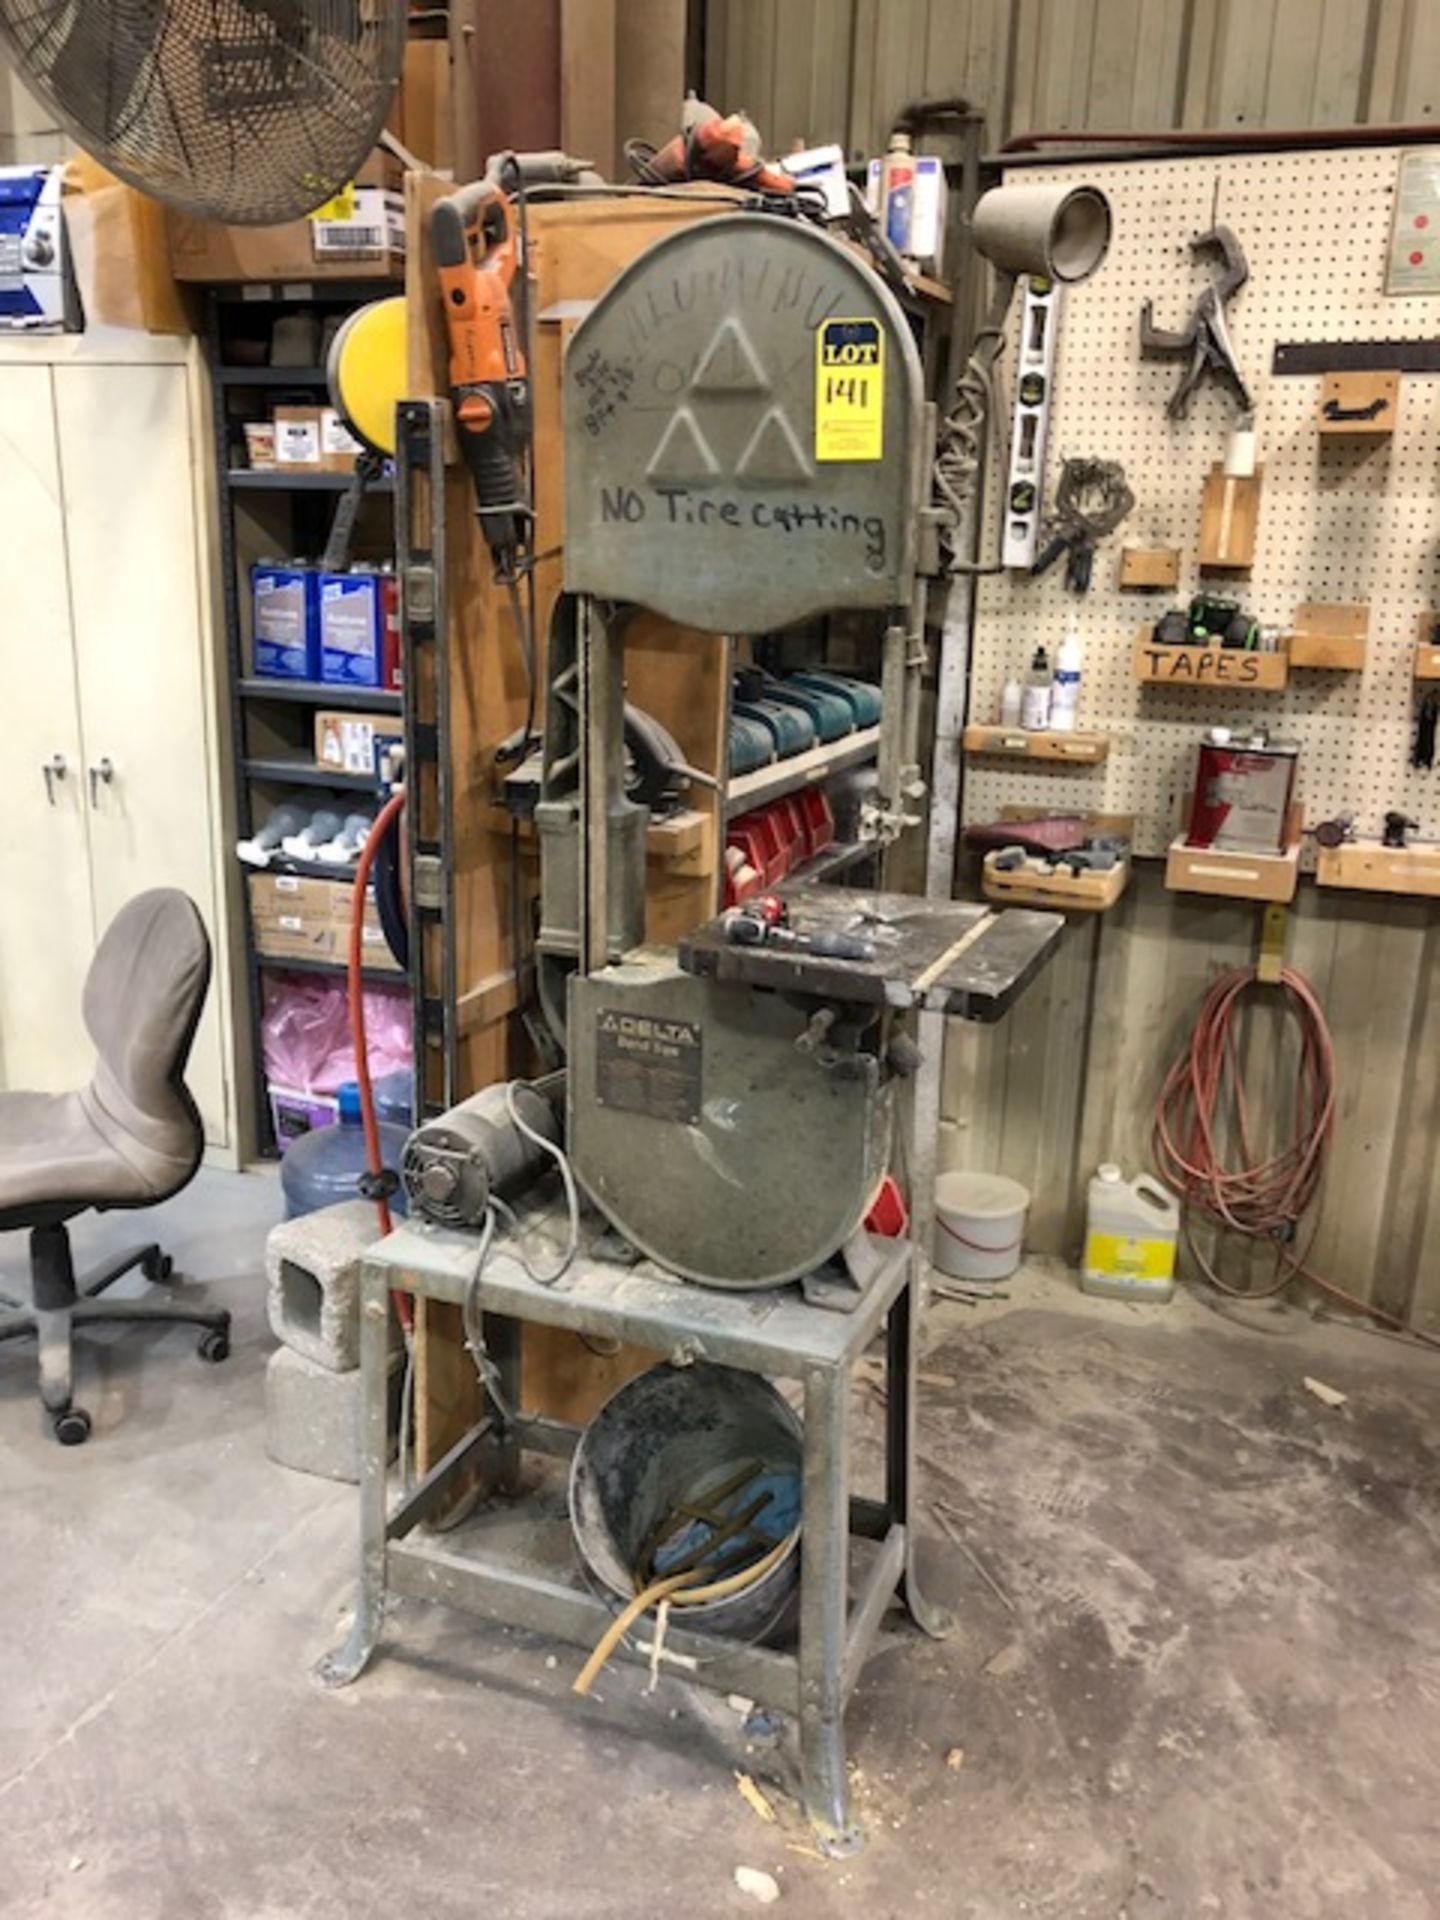 Delta 13" vertical band saw - removal available November 12, 2018